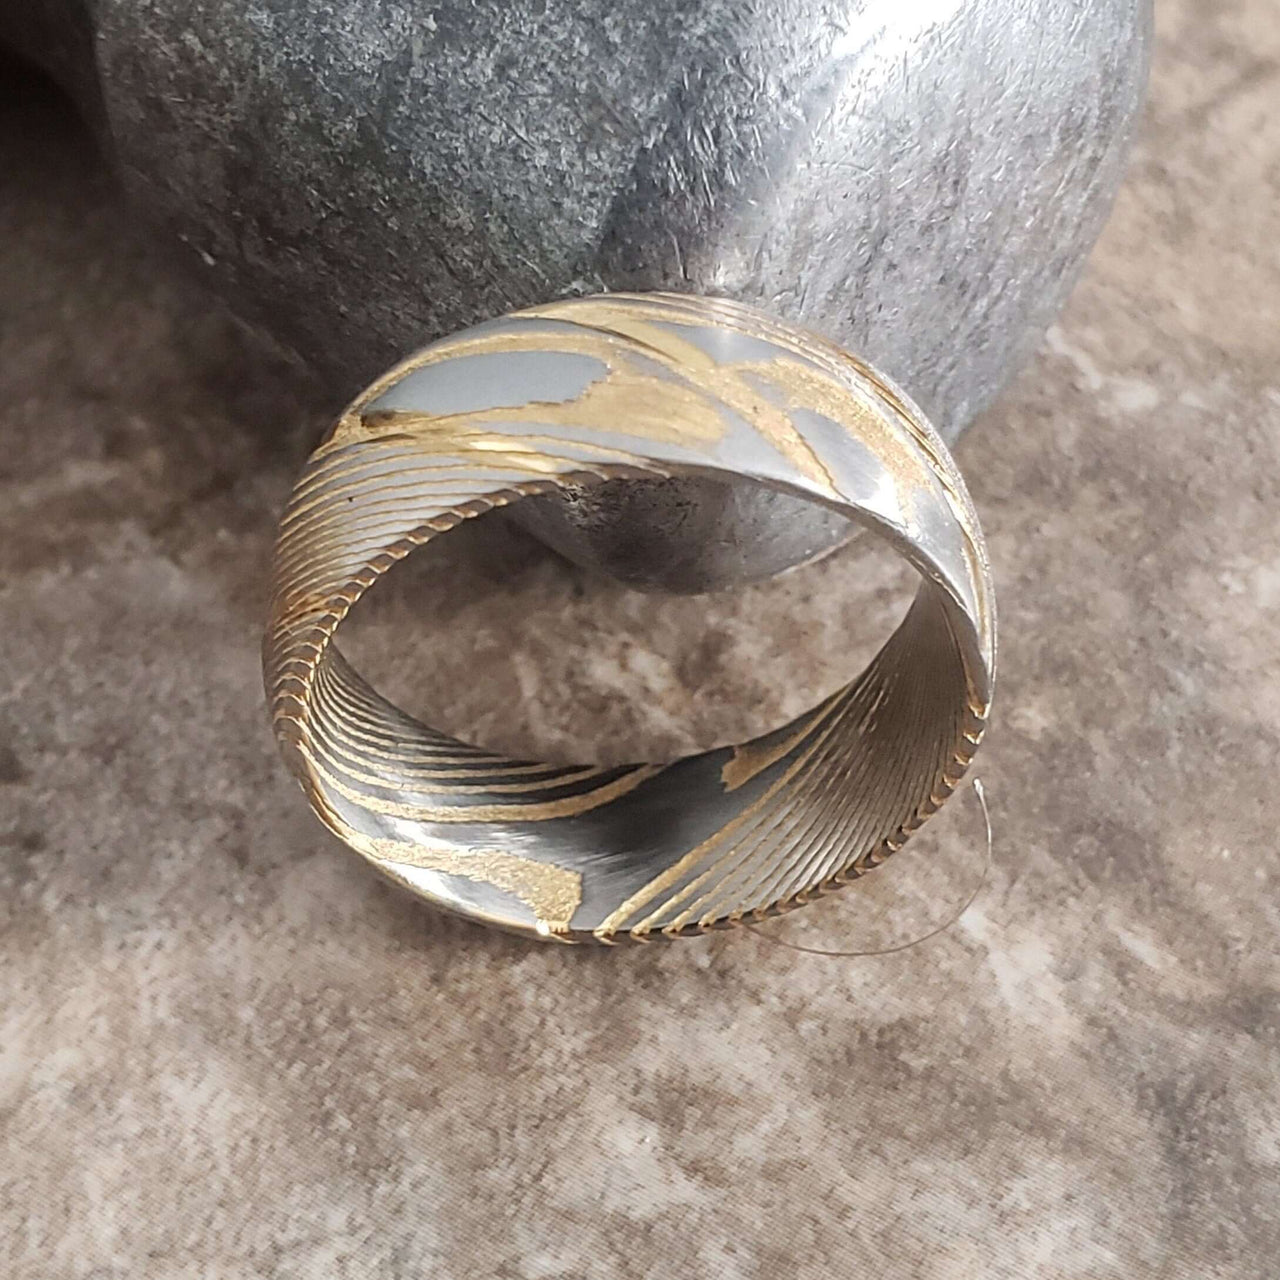 Damascus Steel Ring, Damascus Steel Mens Wedding Band - Unique Ring for Men - Damascus Steel Yellow Gold - 8mm Wide